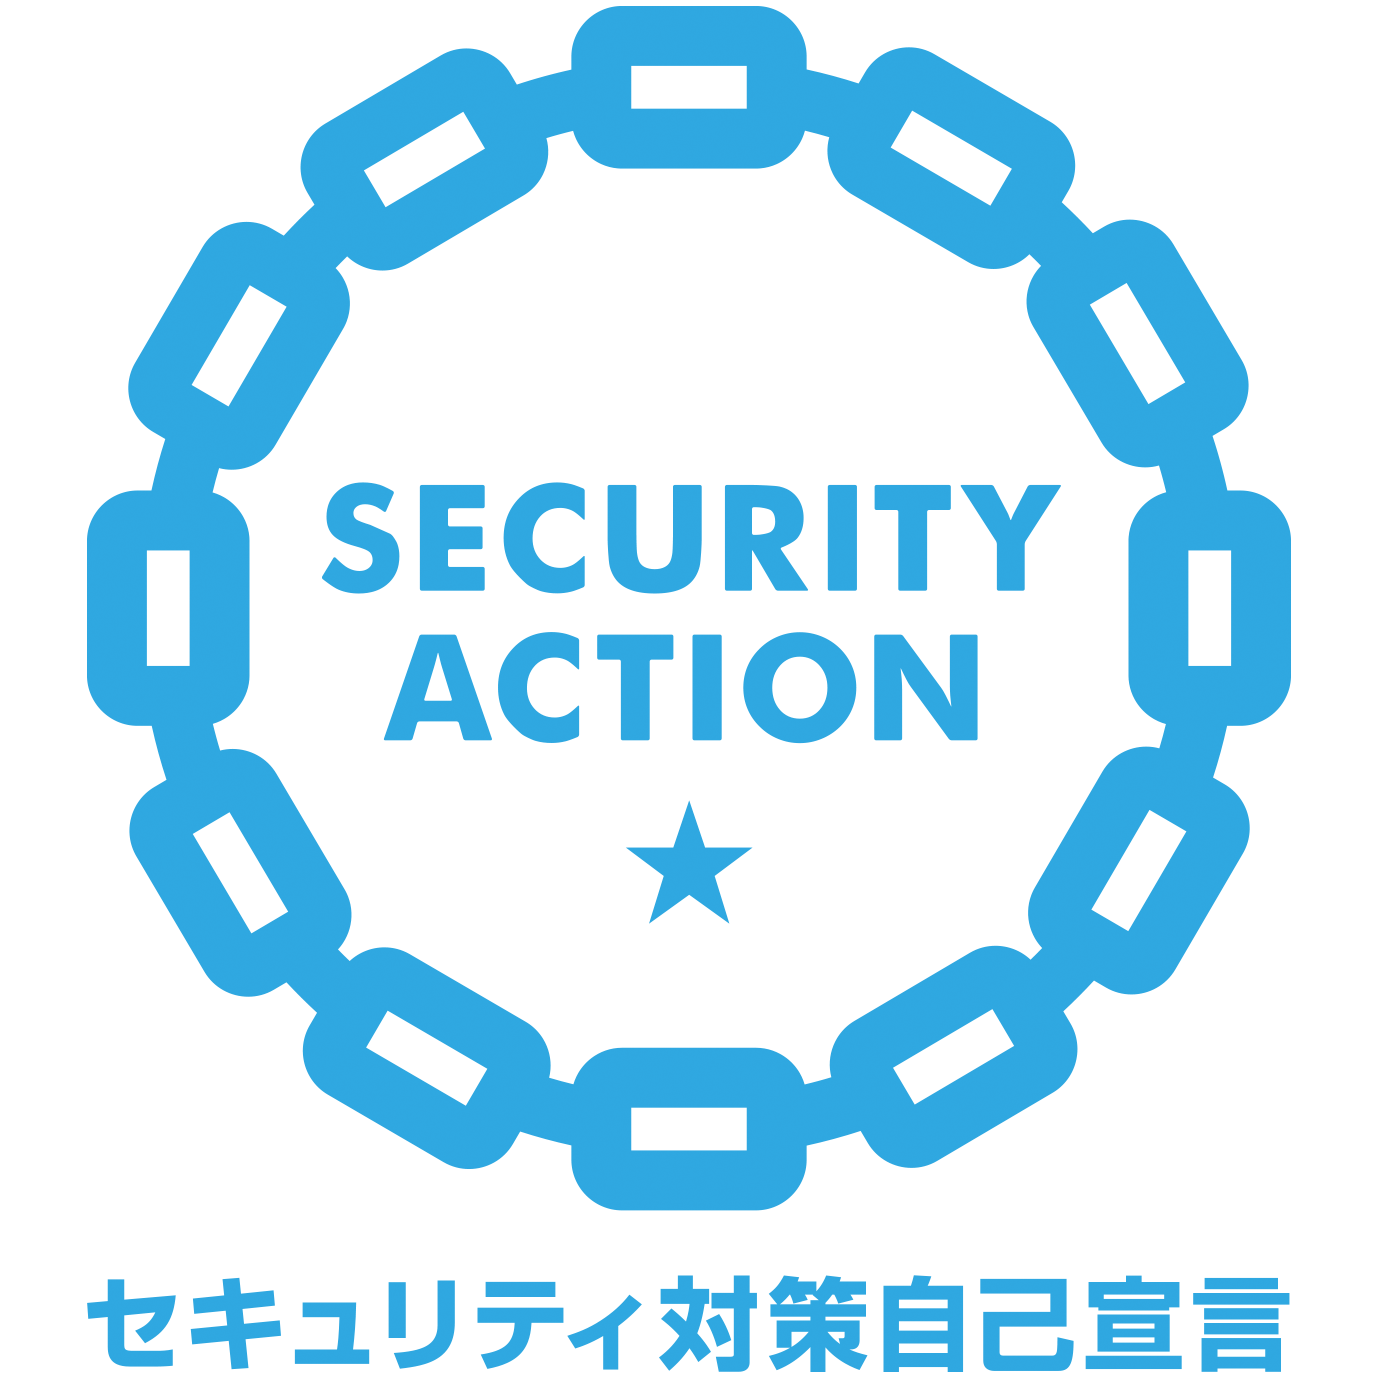 SECURTY ACTION(一つ星)